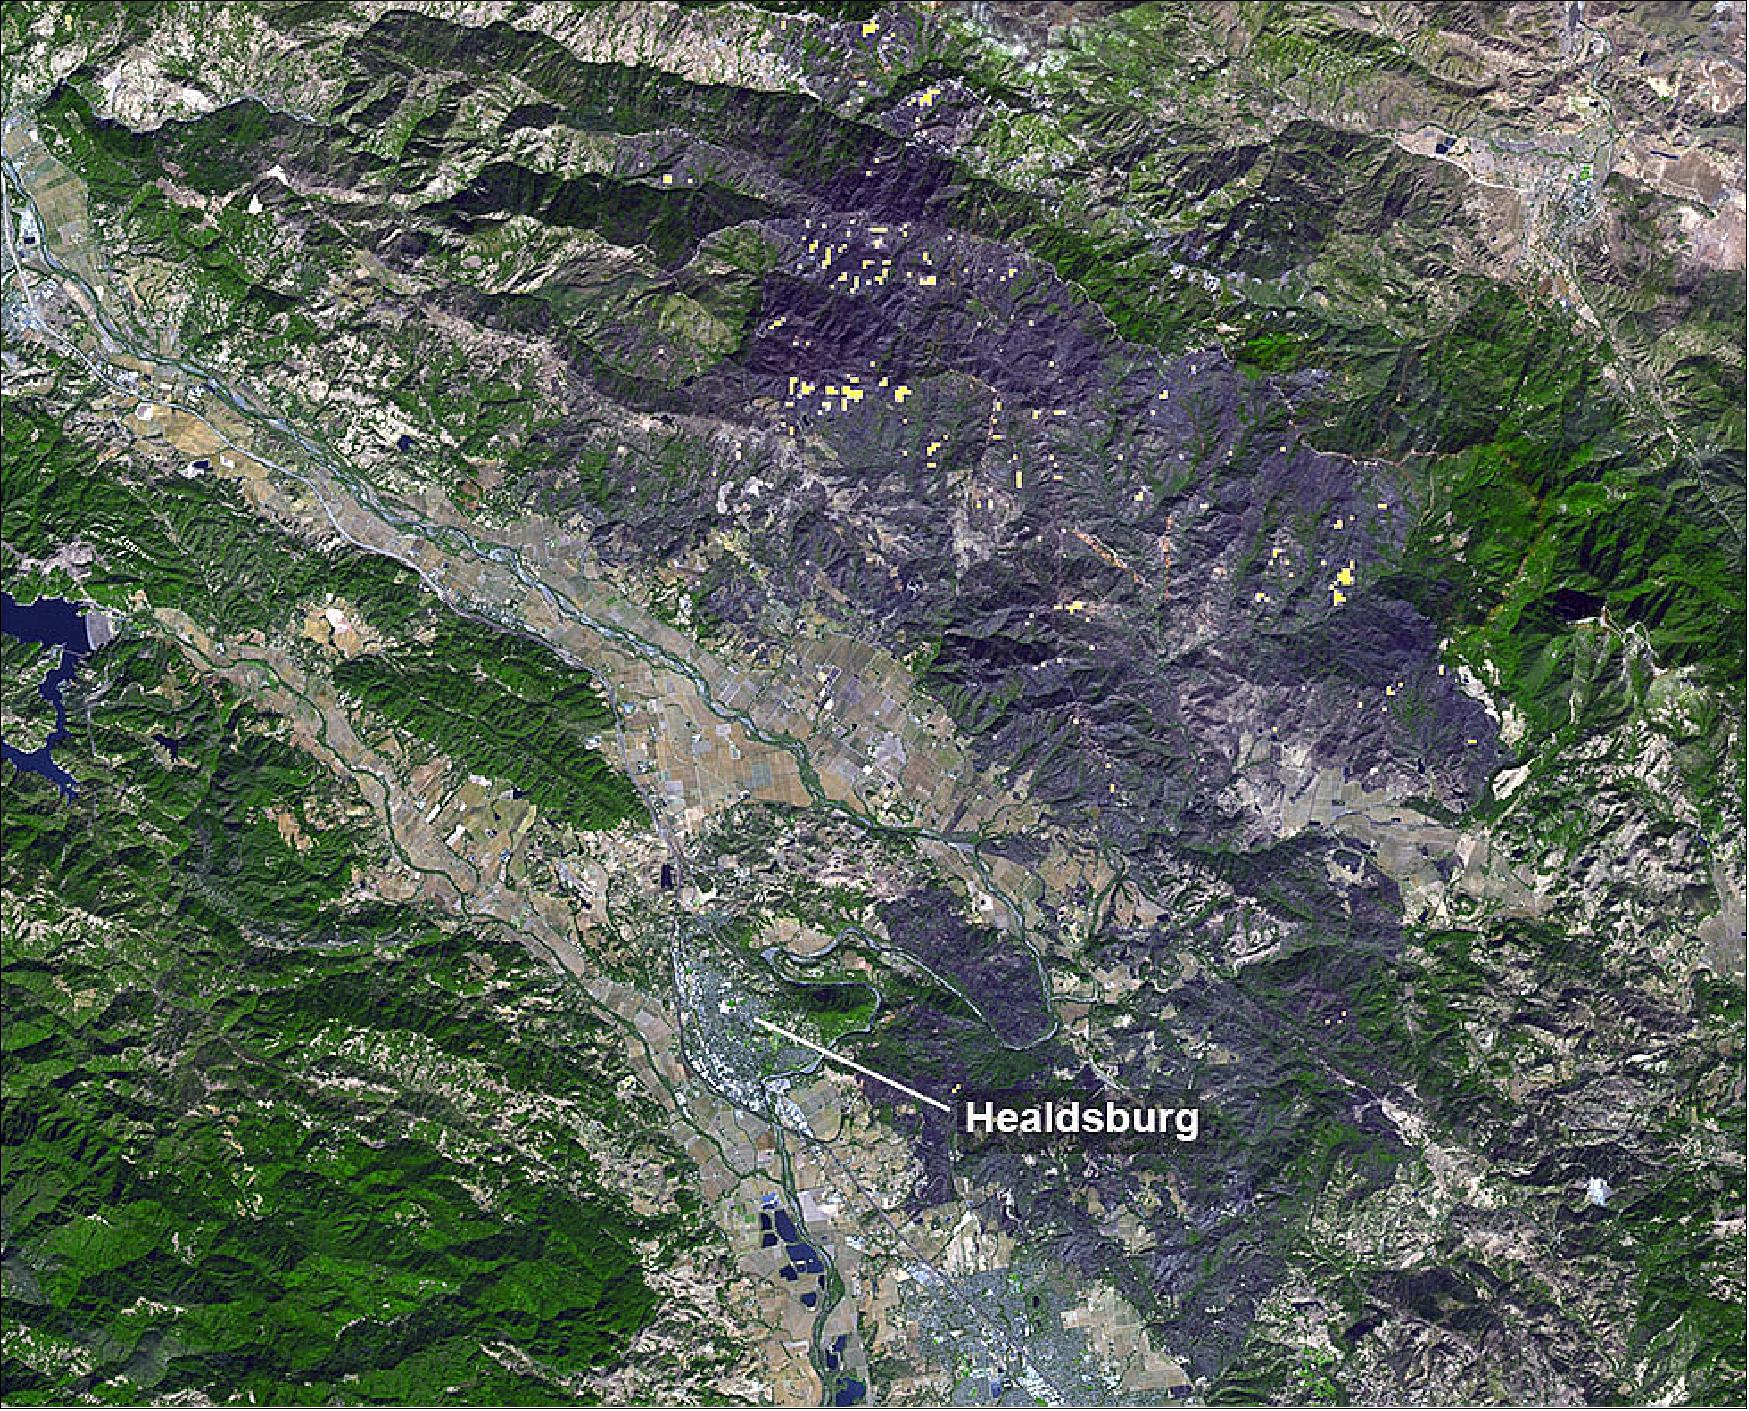 Figure 11: A large burn scar can be seen from space where the Kincade Fire has burned through Sonoma County, California. The image was taken on 3 November 2019, by the ASTER instrument aboard NASA's Terra satellite (image credit: NASA/JPL-Caltech)